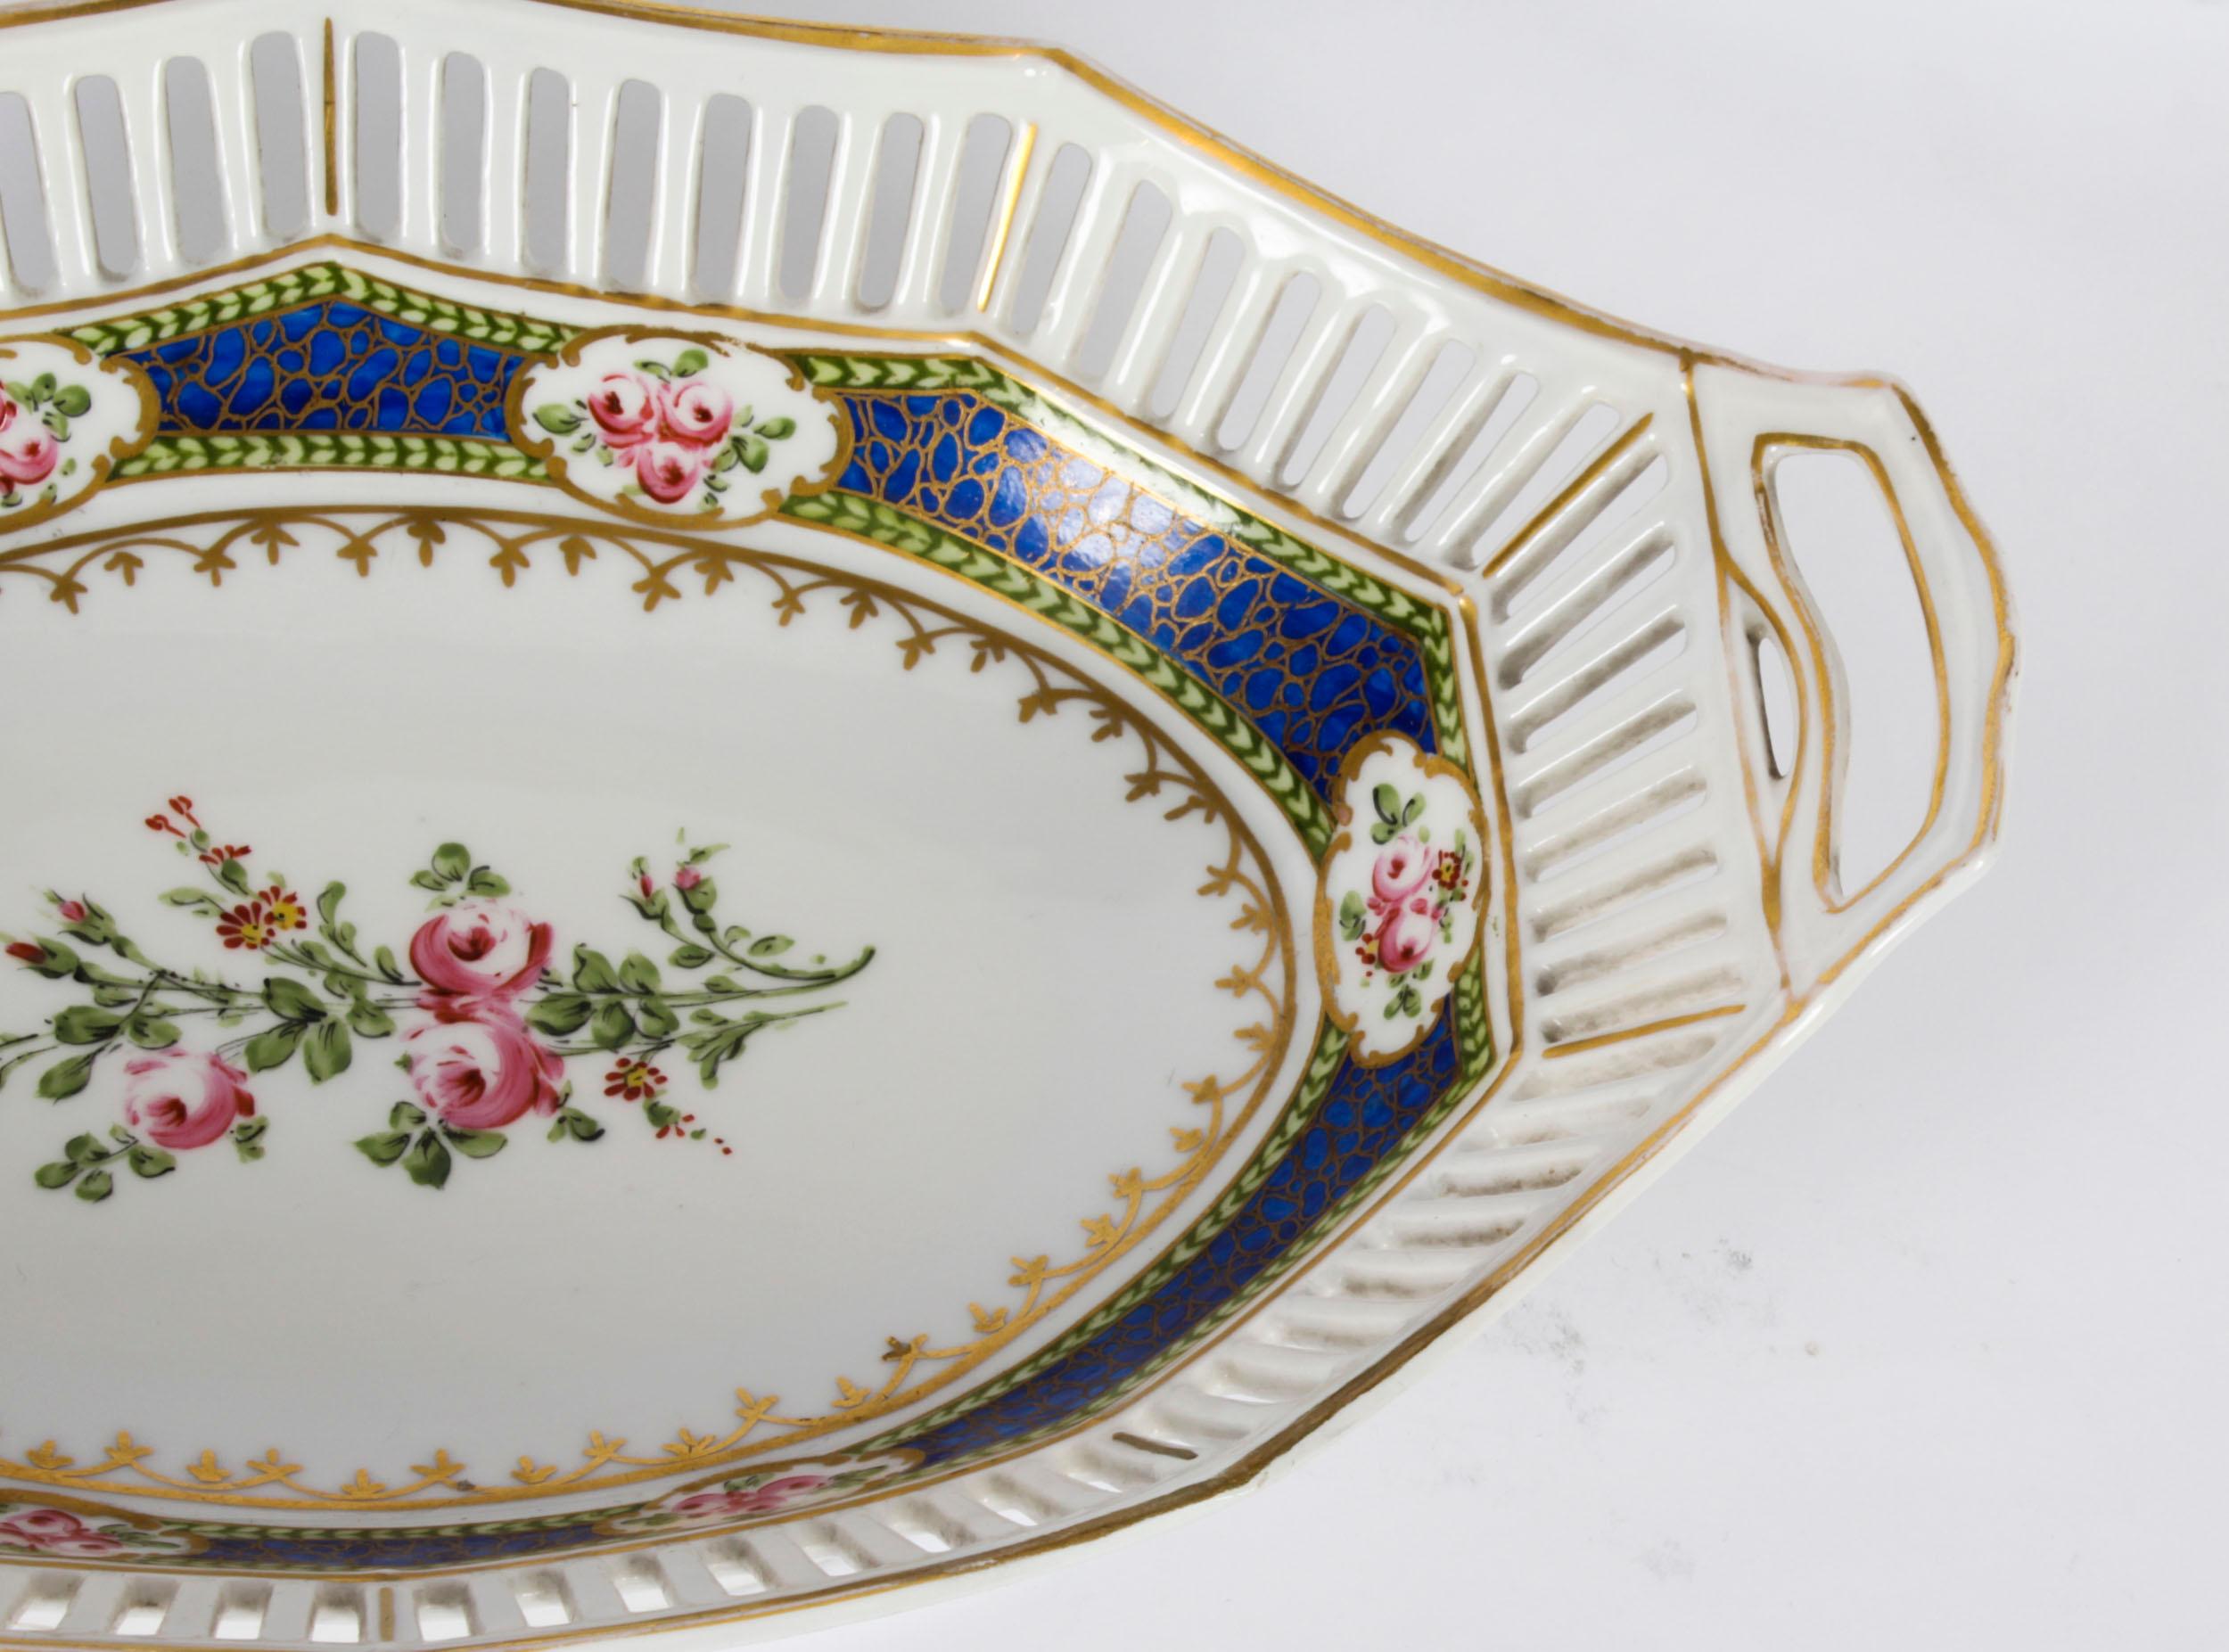 Antique French Sevres Oval Porcelain Dish Late 19th Century For Sale 2